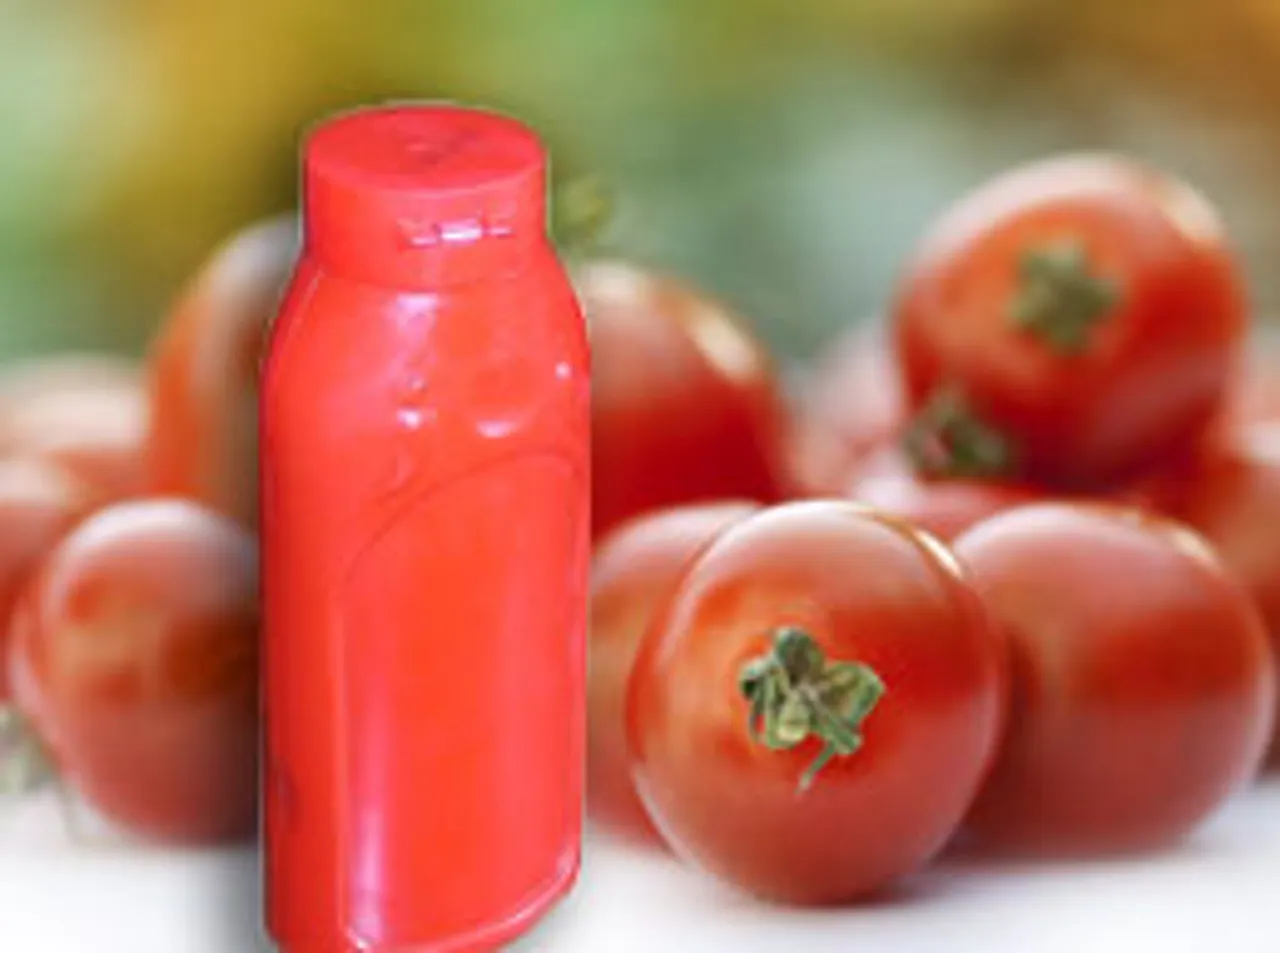 is there a way to substitute ready made tomato pur